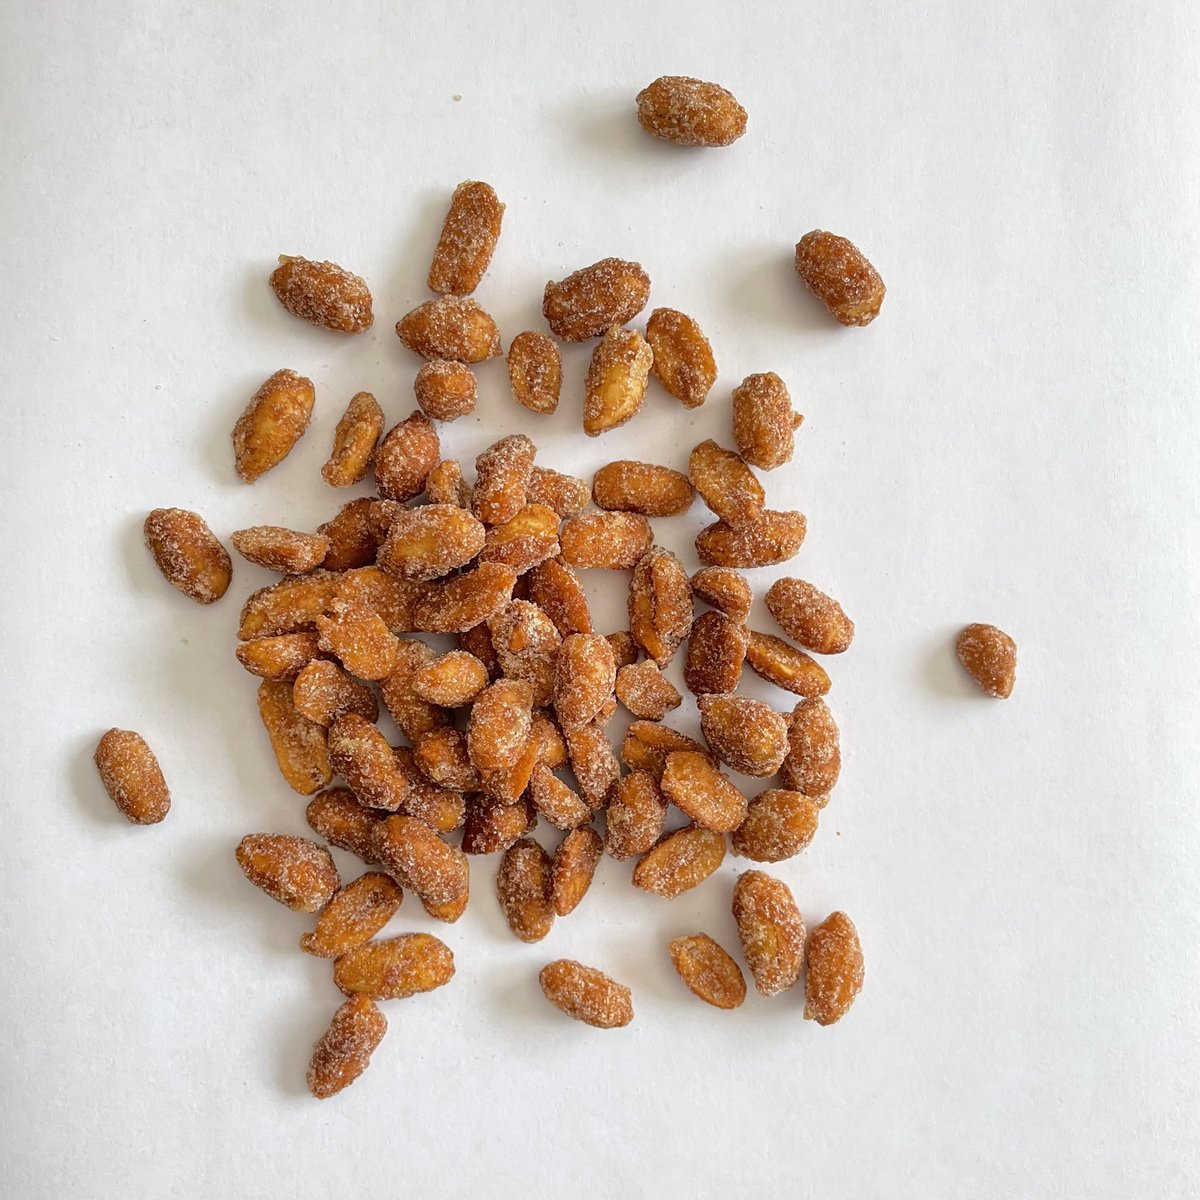 Summer is the perfect time to snack on this 20 oz can of vacuum sealed wonderment that is Honey Roasted Nuts. 🥜 

hancockpeanuts.com/product/honey-…

Code: Hancock = 15% off most items till the end of May.

#hancockpeanuts #summer #honey #jumbopeanuts